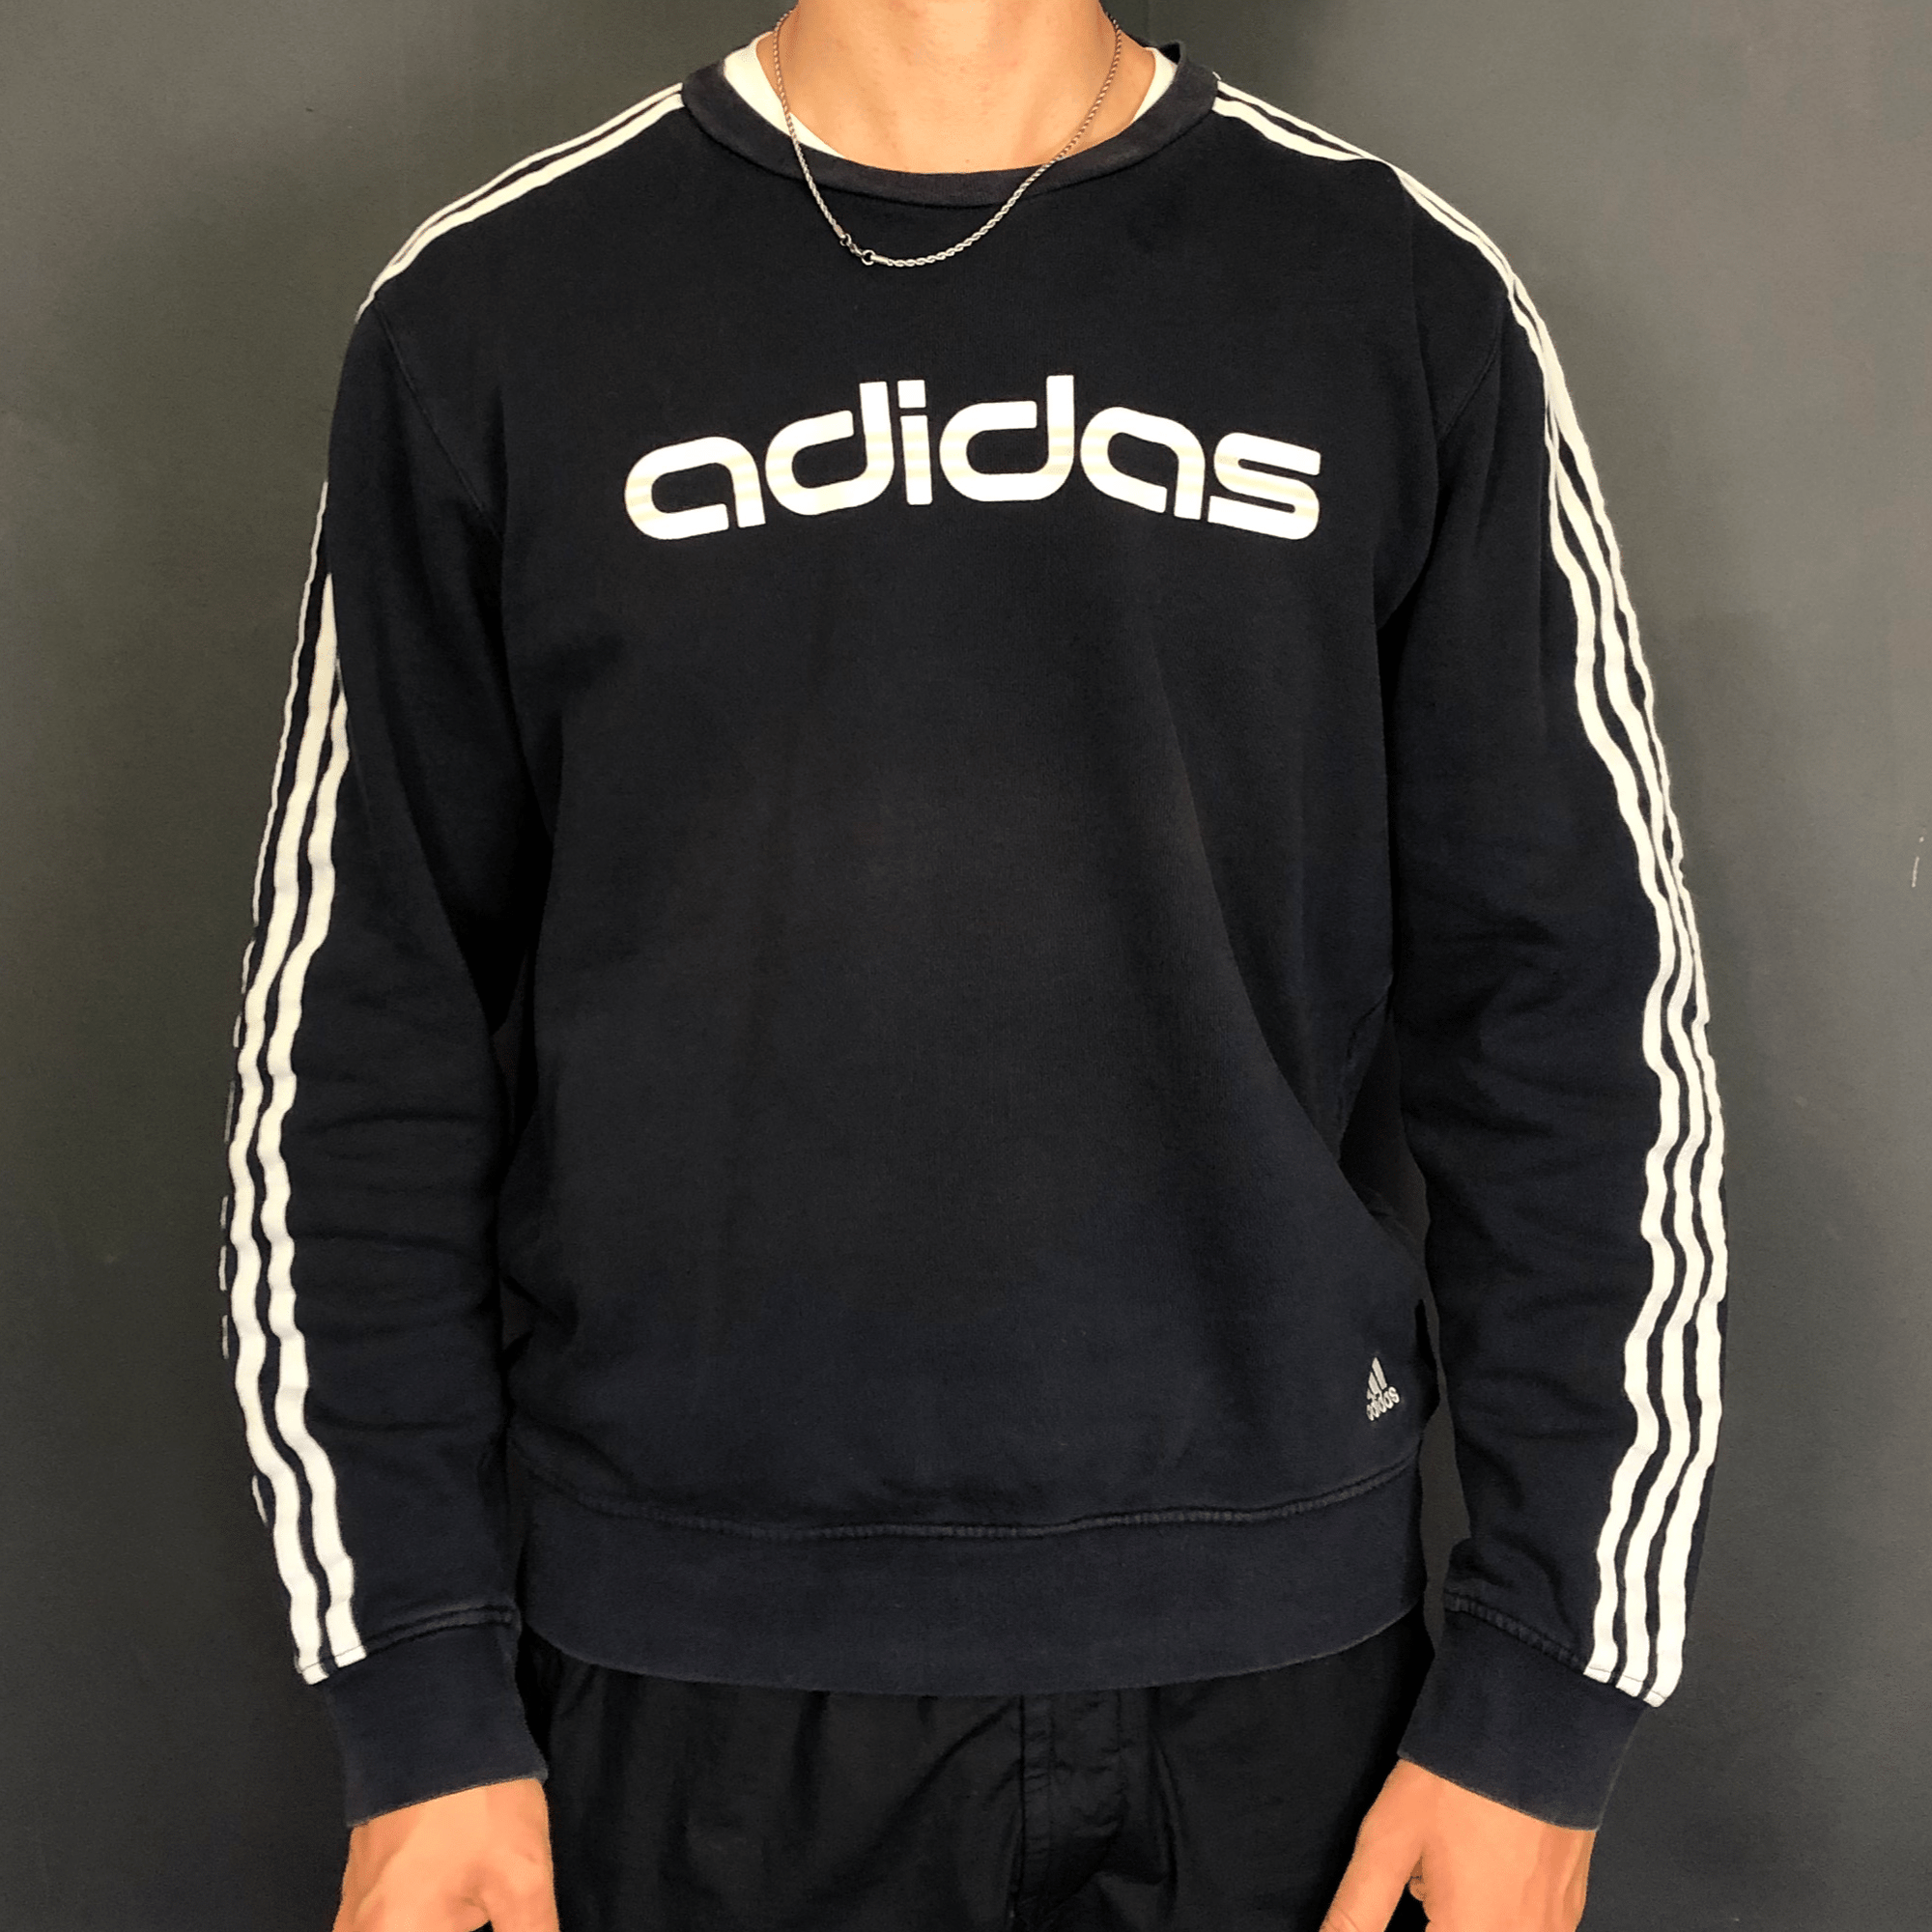 Vintage Adidas Sweatshirt with Printed Spellout - Vintique Clothing